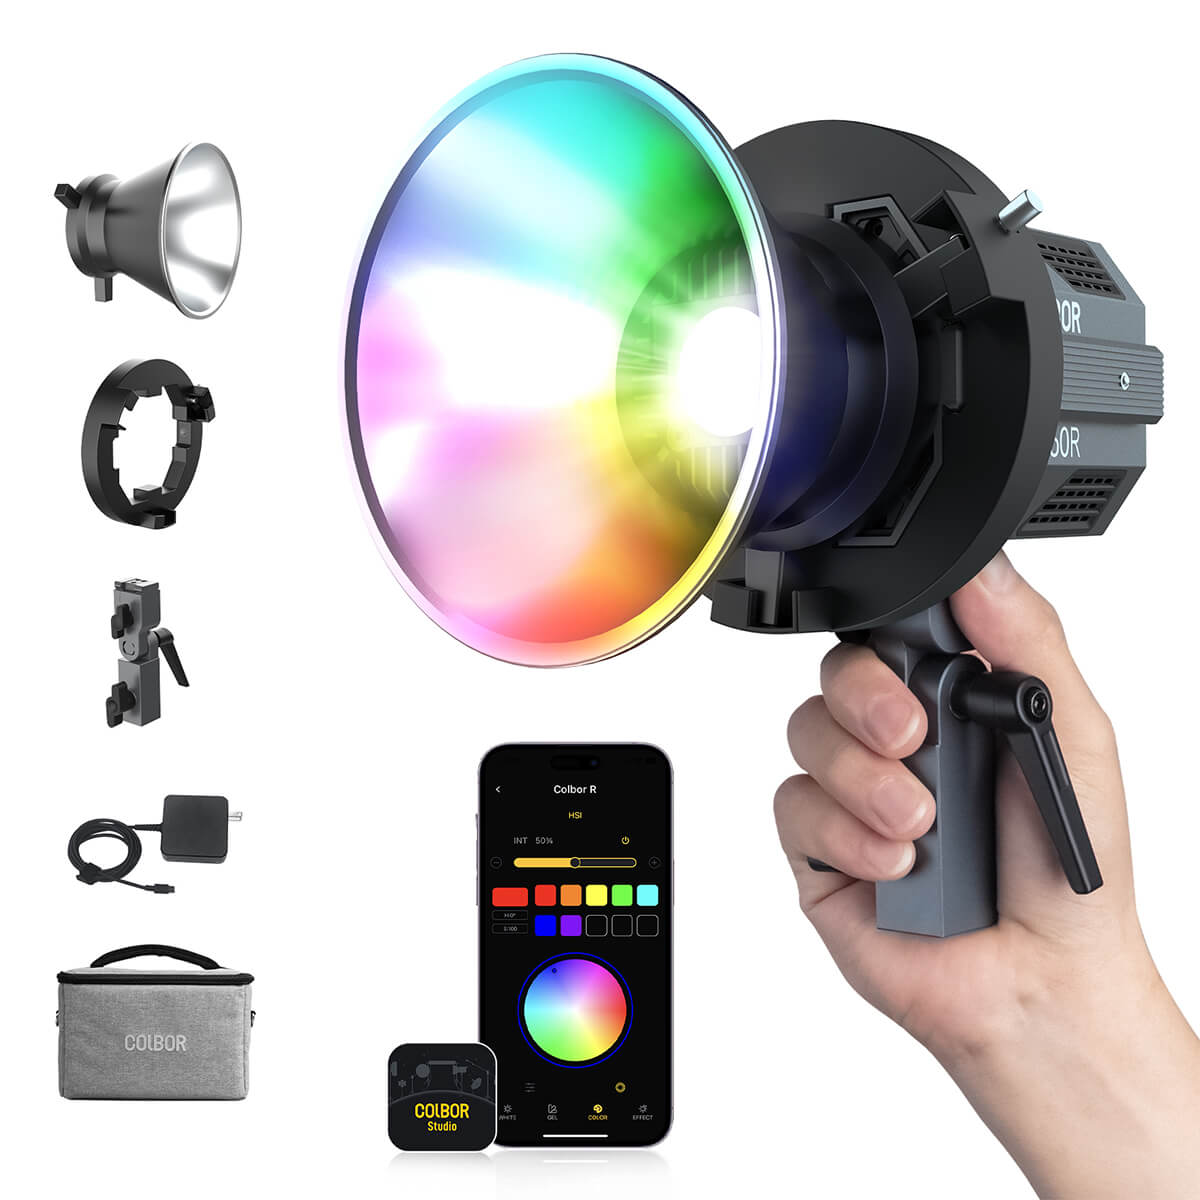 The black COLBOR CL60R RGB video light of full color has several accessories and has a App software to achieve remote control. 